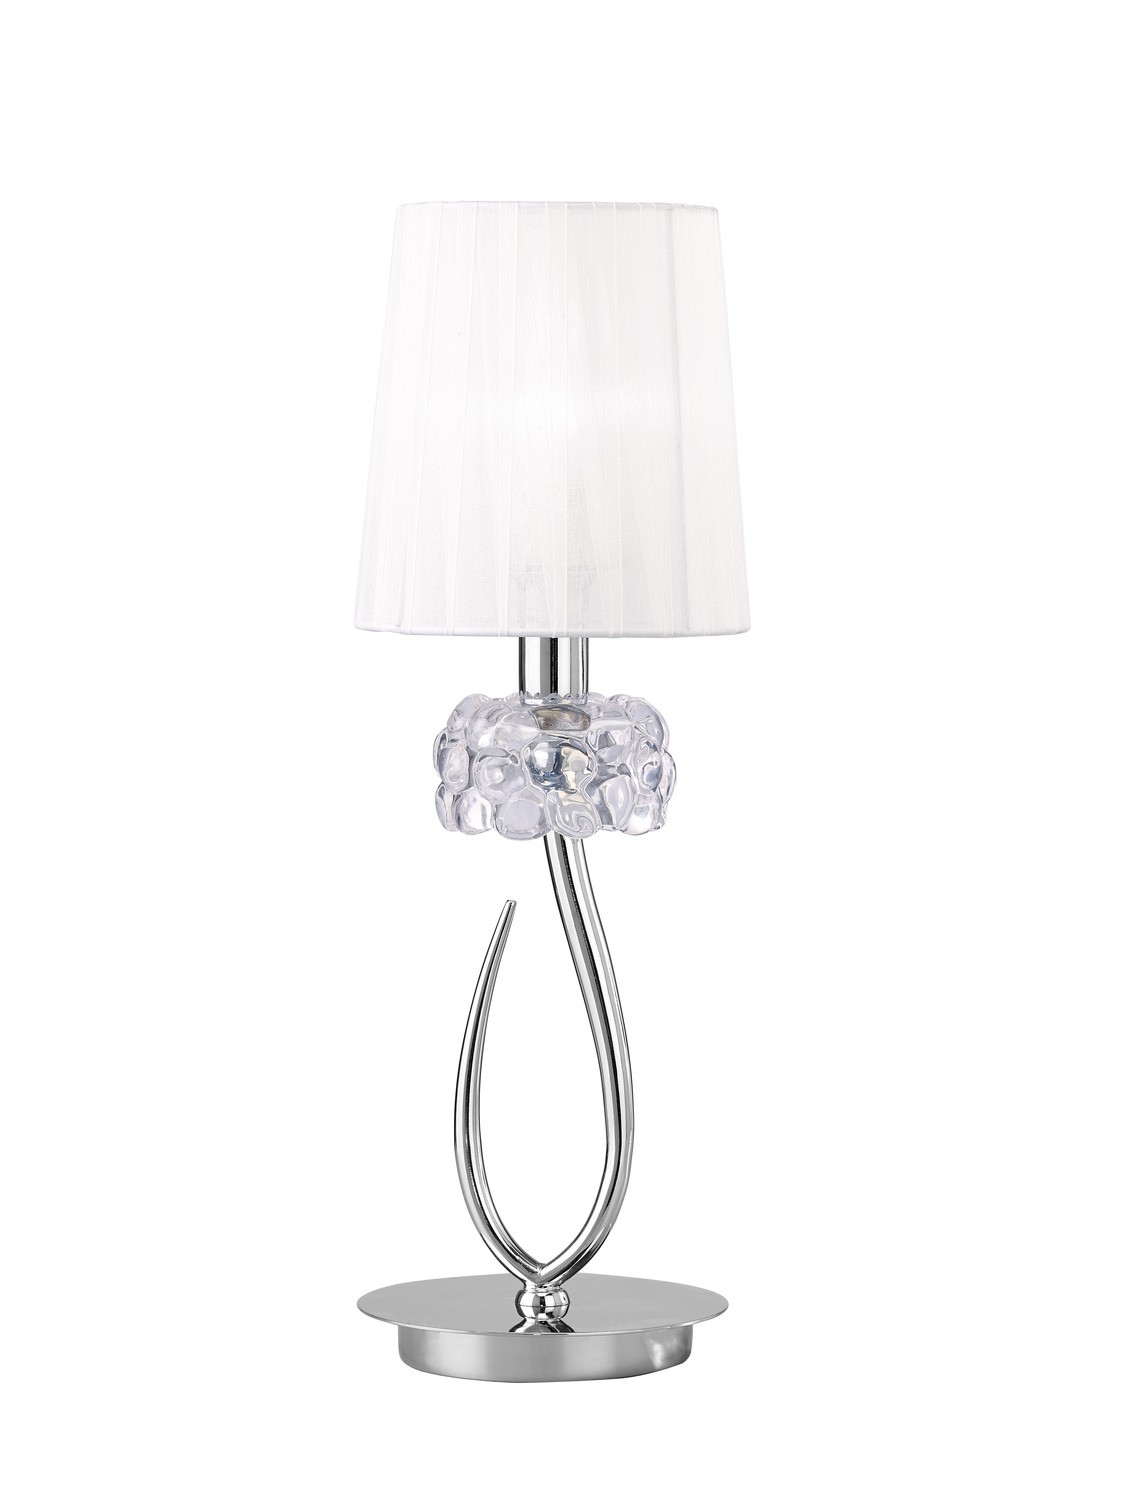 Loewe Table Lamp 1 Light E27 Small, Polished Chrome With White Shade